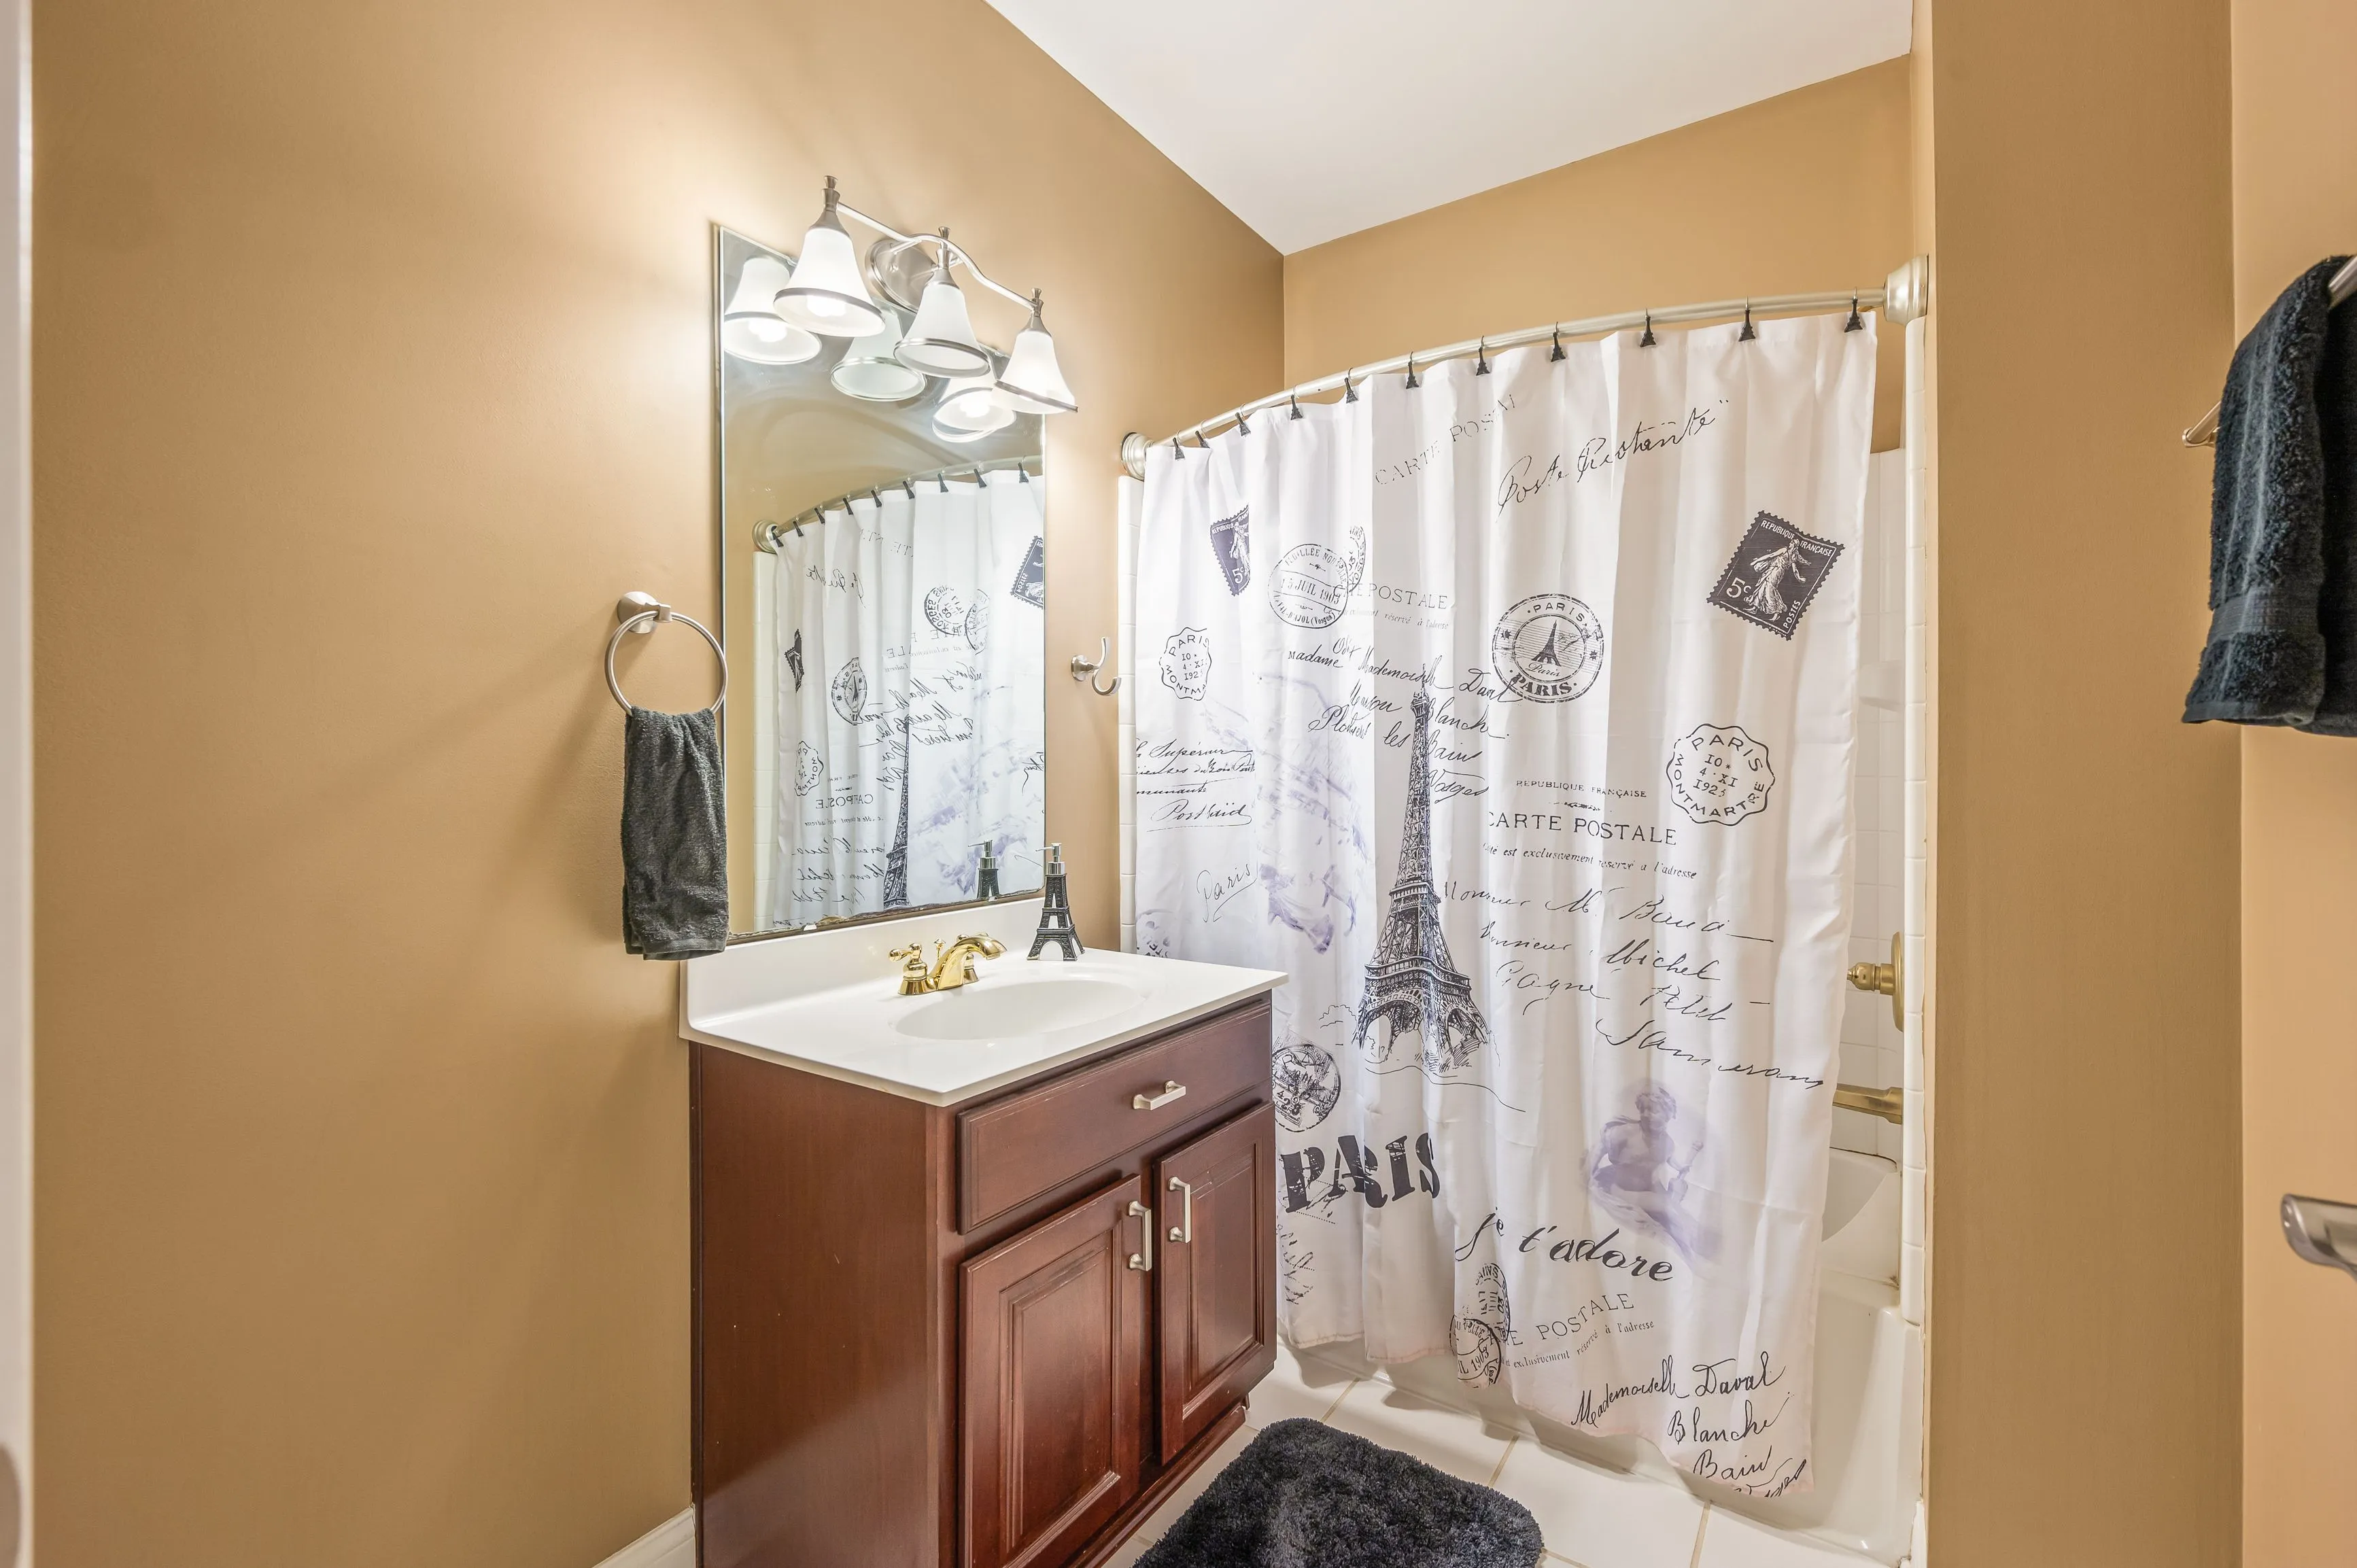 Compact bathroom with beige walls, shower curtain with Paris landmarks, wooden vanity cabinet and wall-mounted towel.